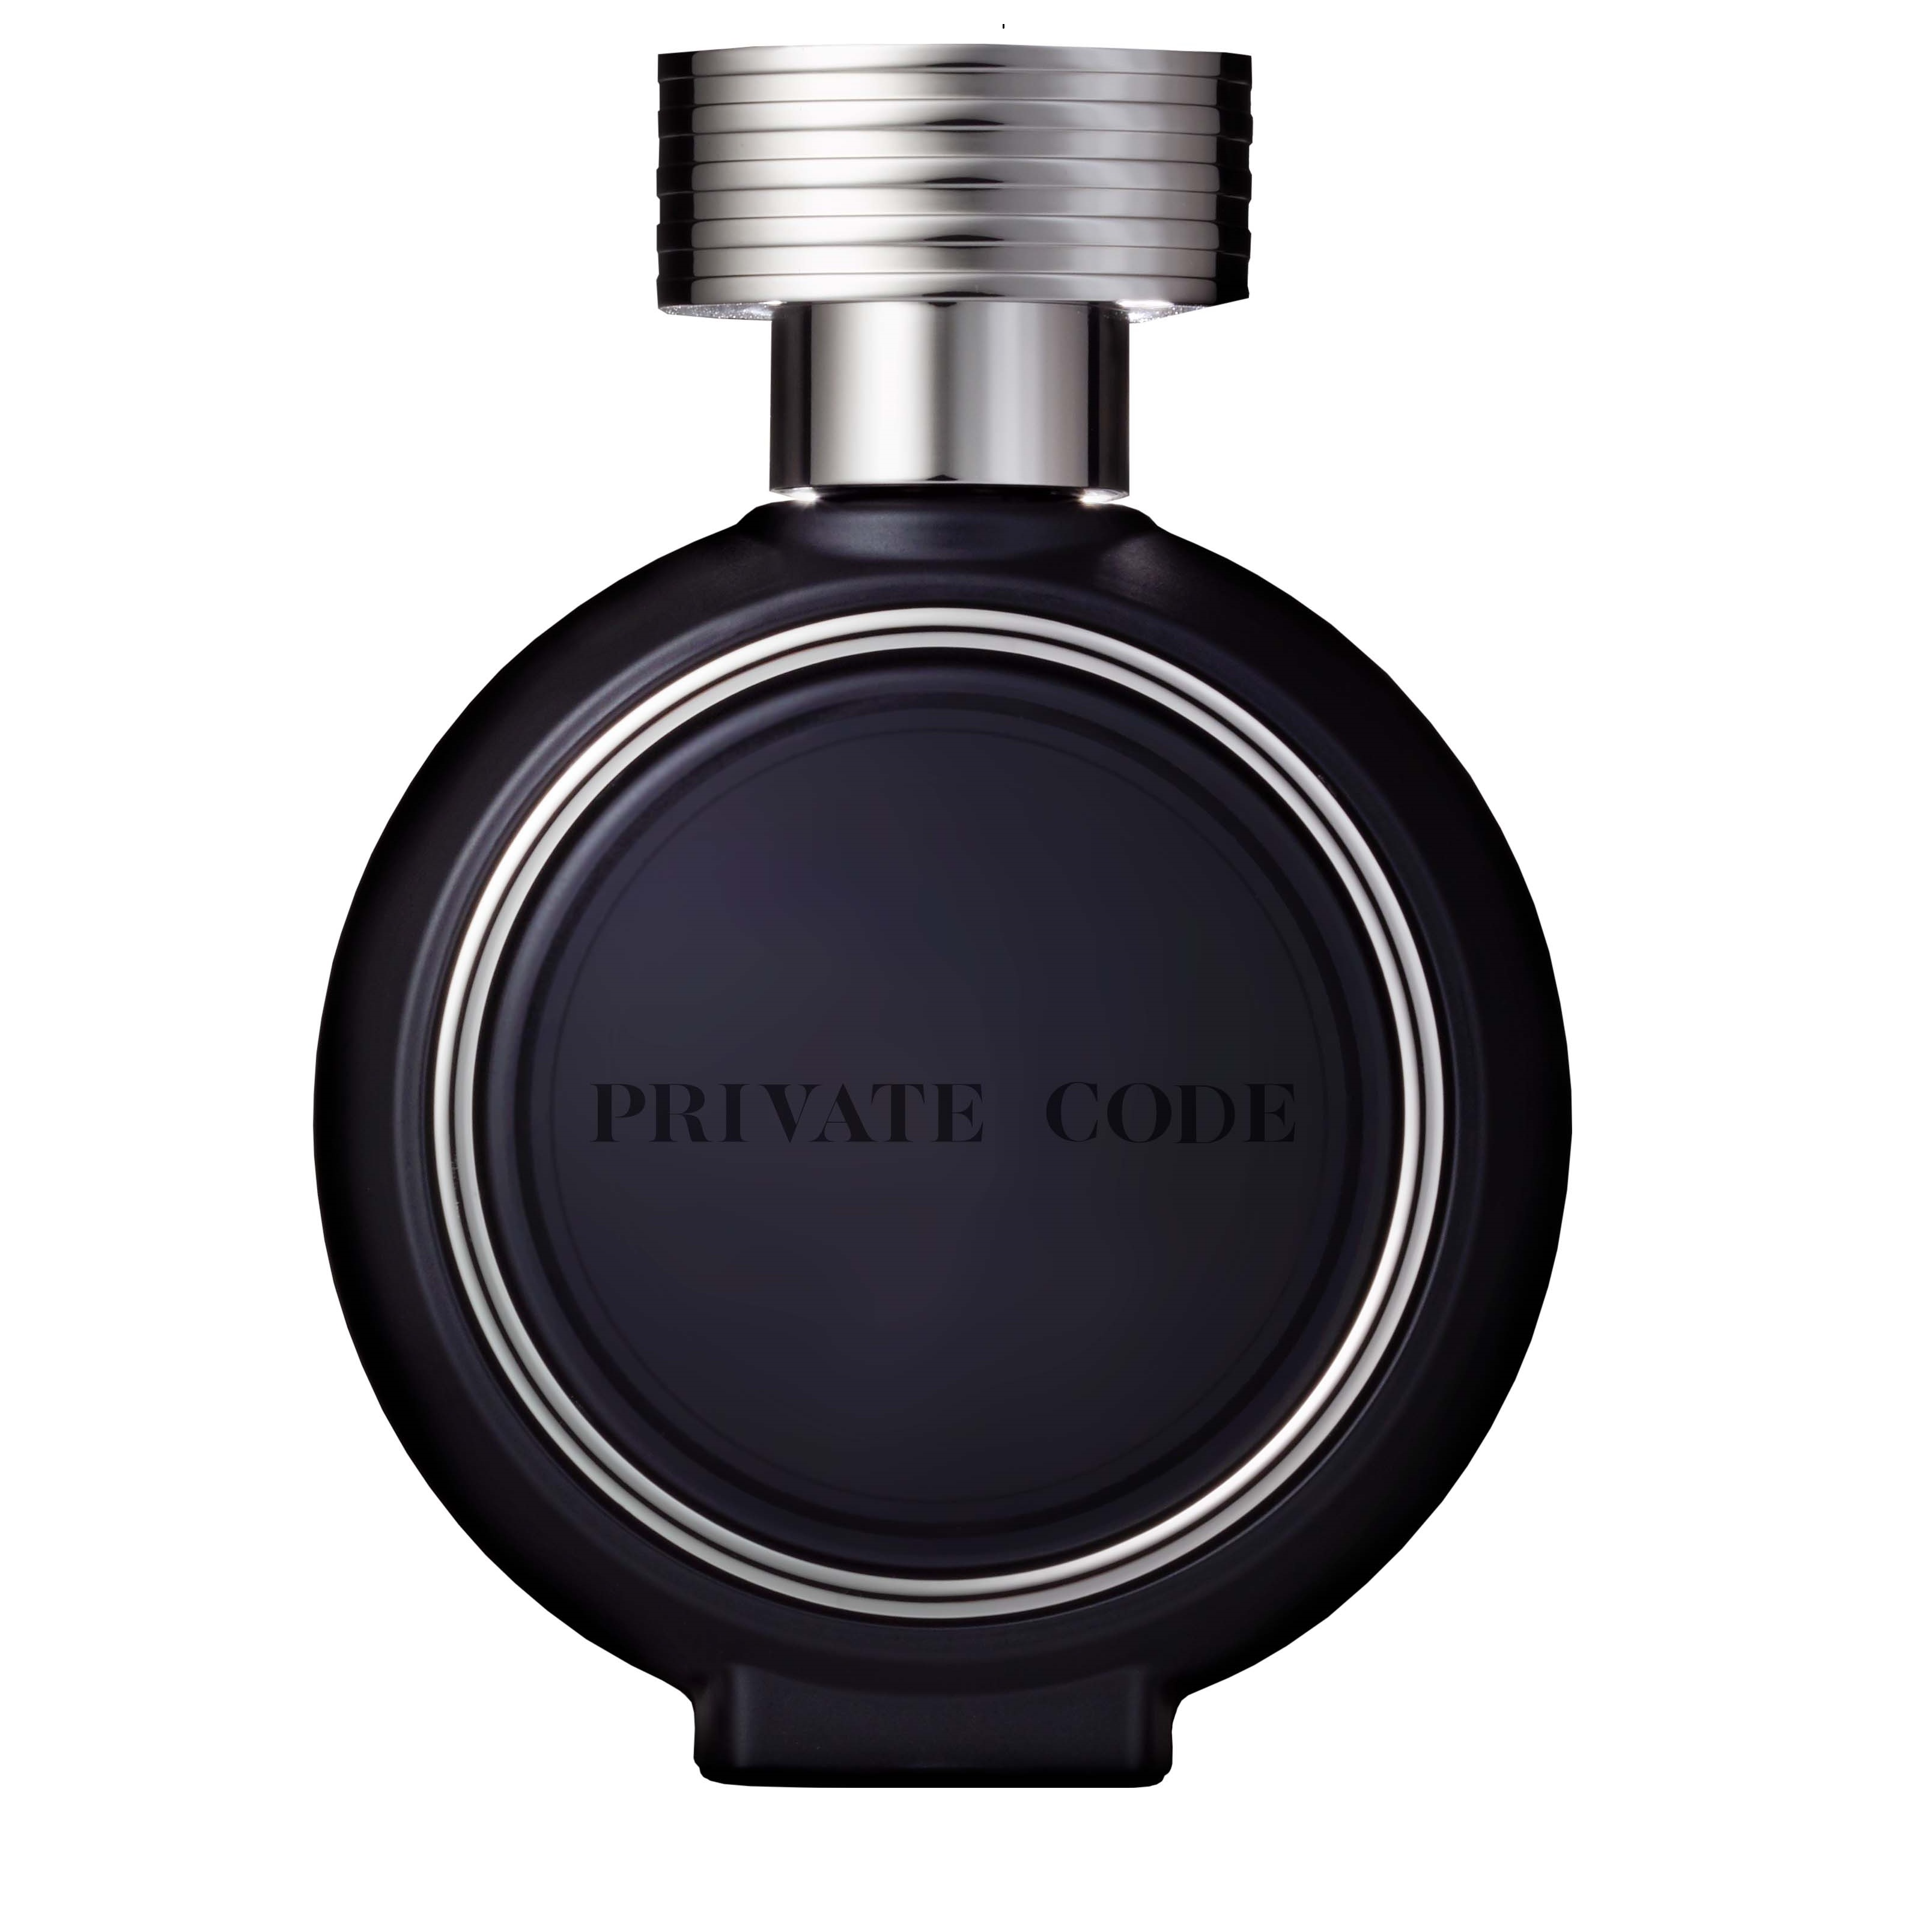 Hfc royal power. Private code HFC Парфюм. HFC private code 75ml. Haute Fragrance Company HFC private code. HFC Haute Fragrance Company.